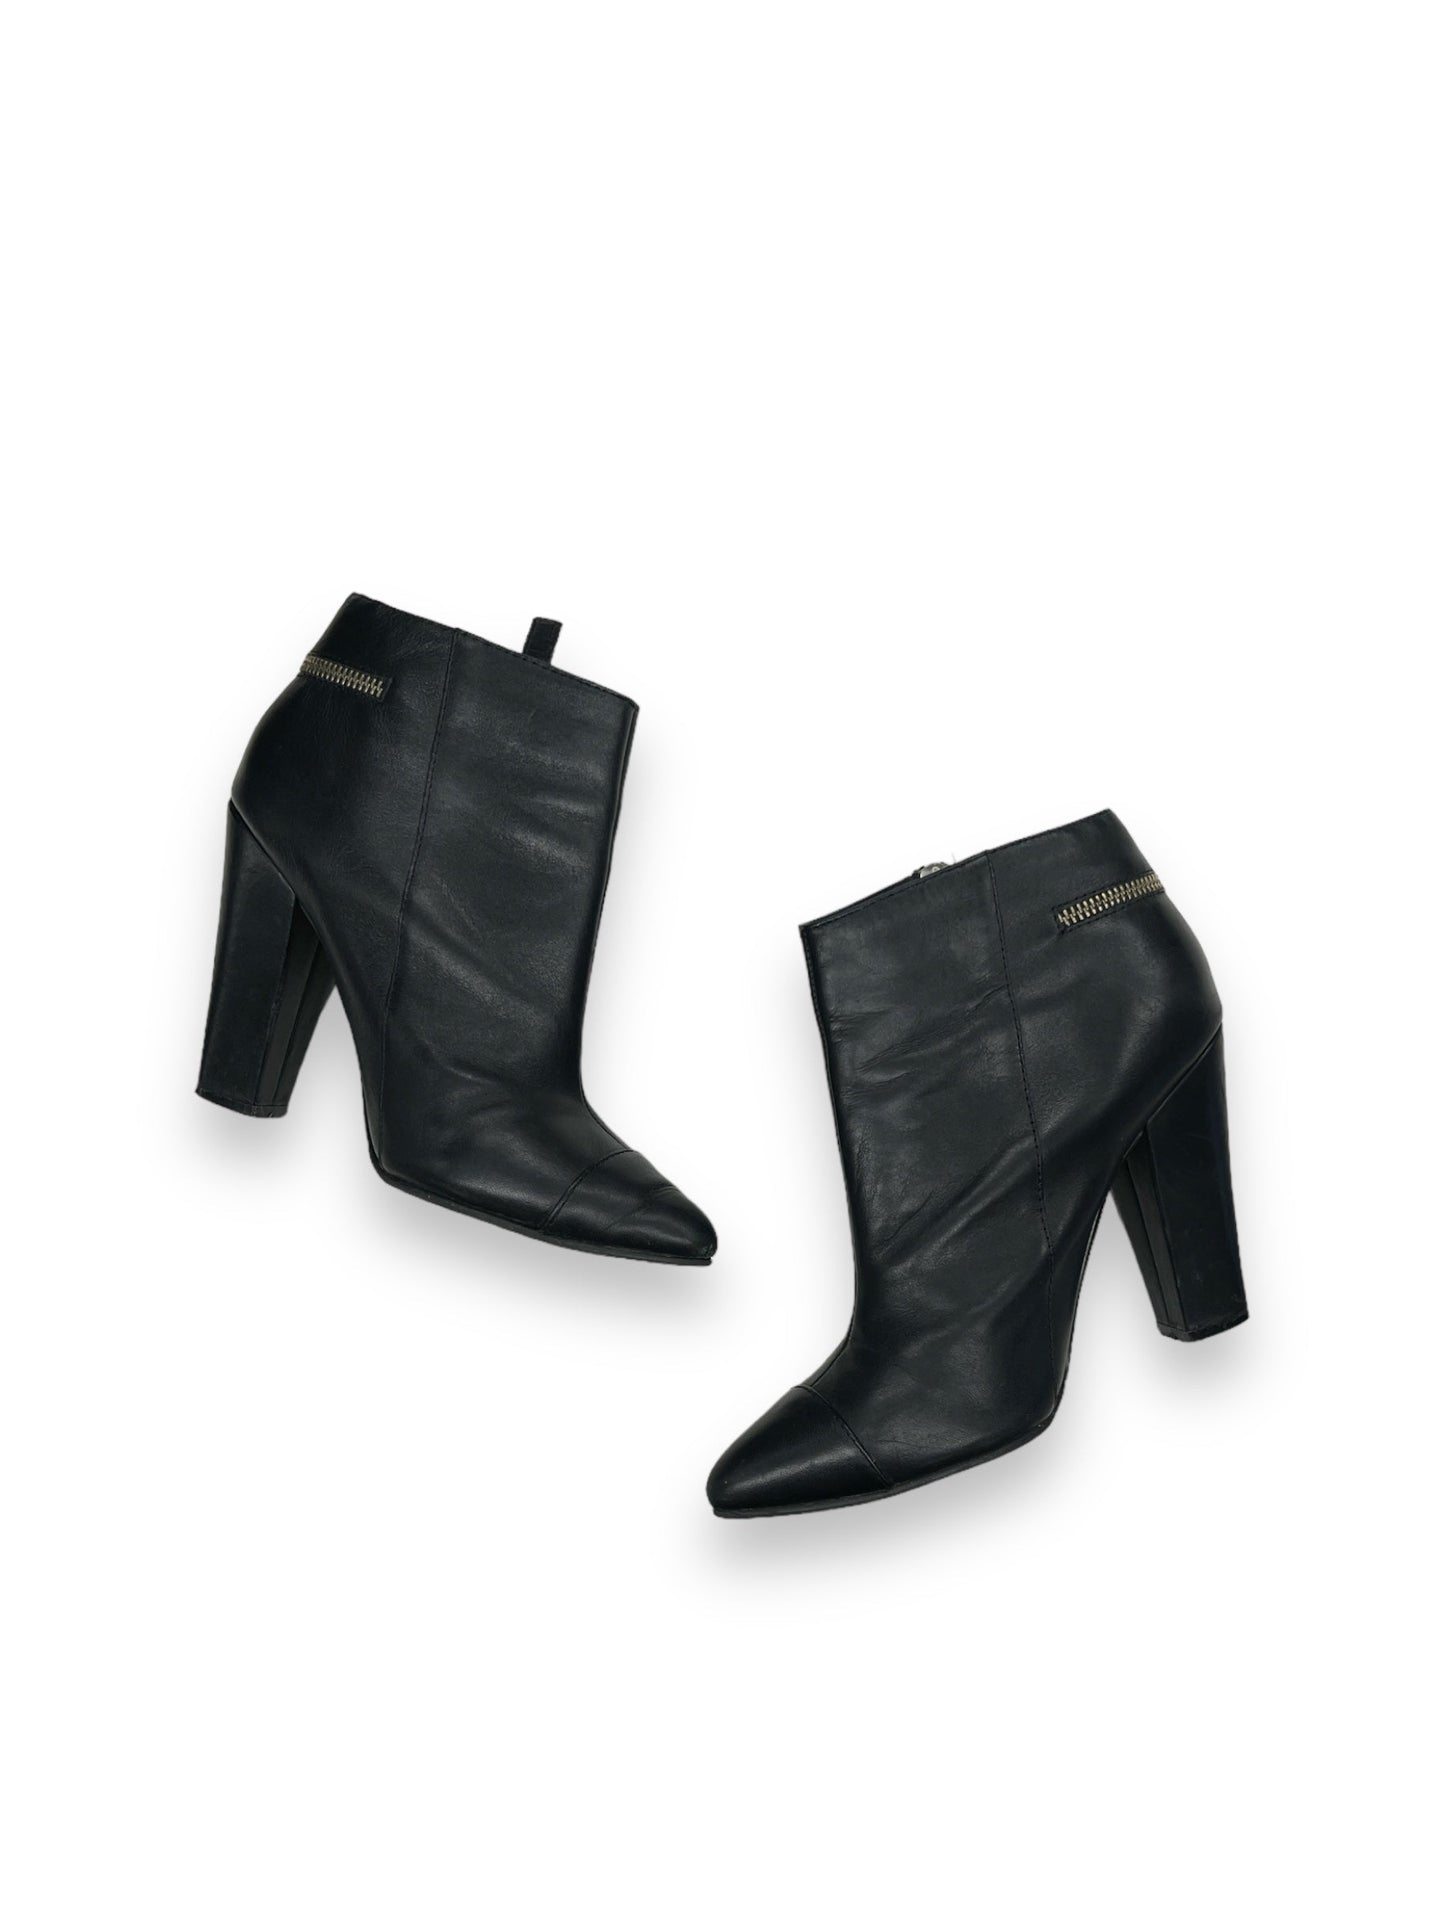 Boots Ankle Heels By Aldo  Size: 8